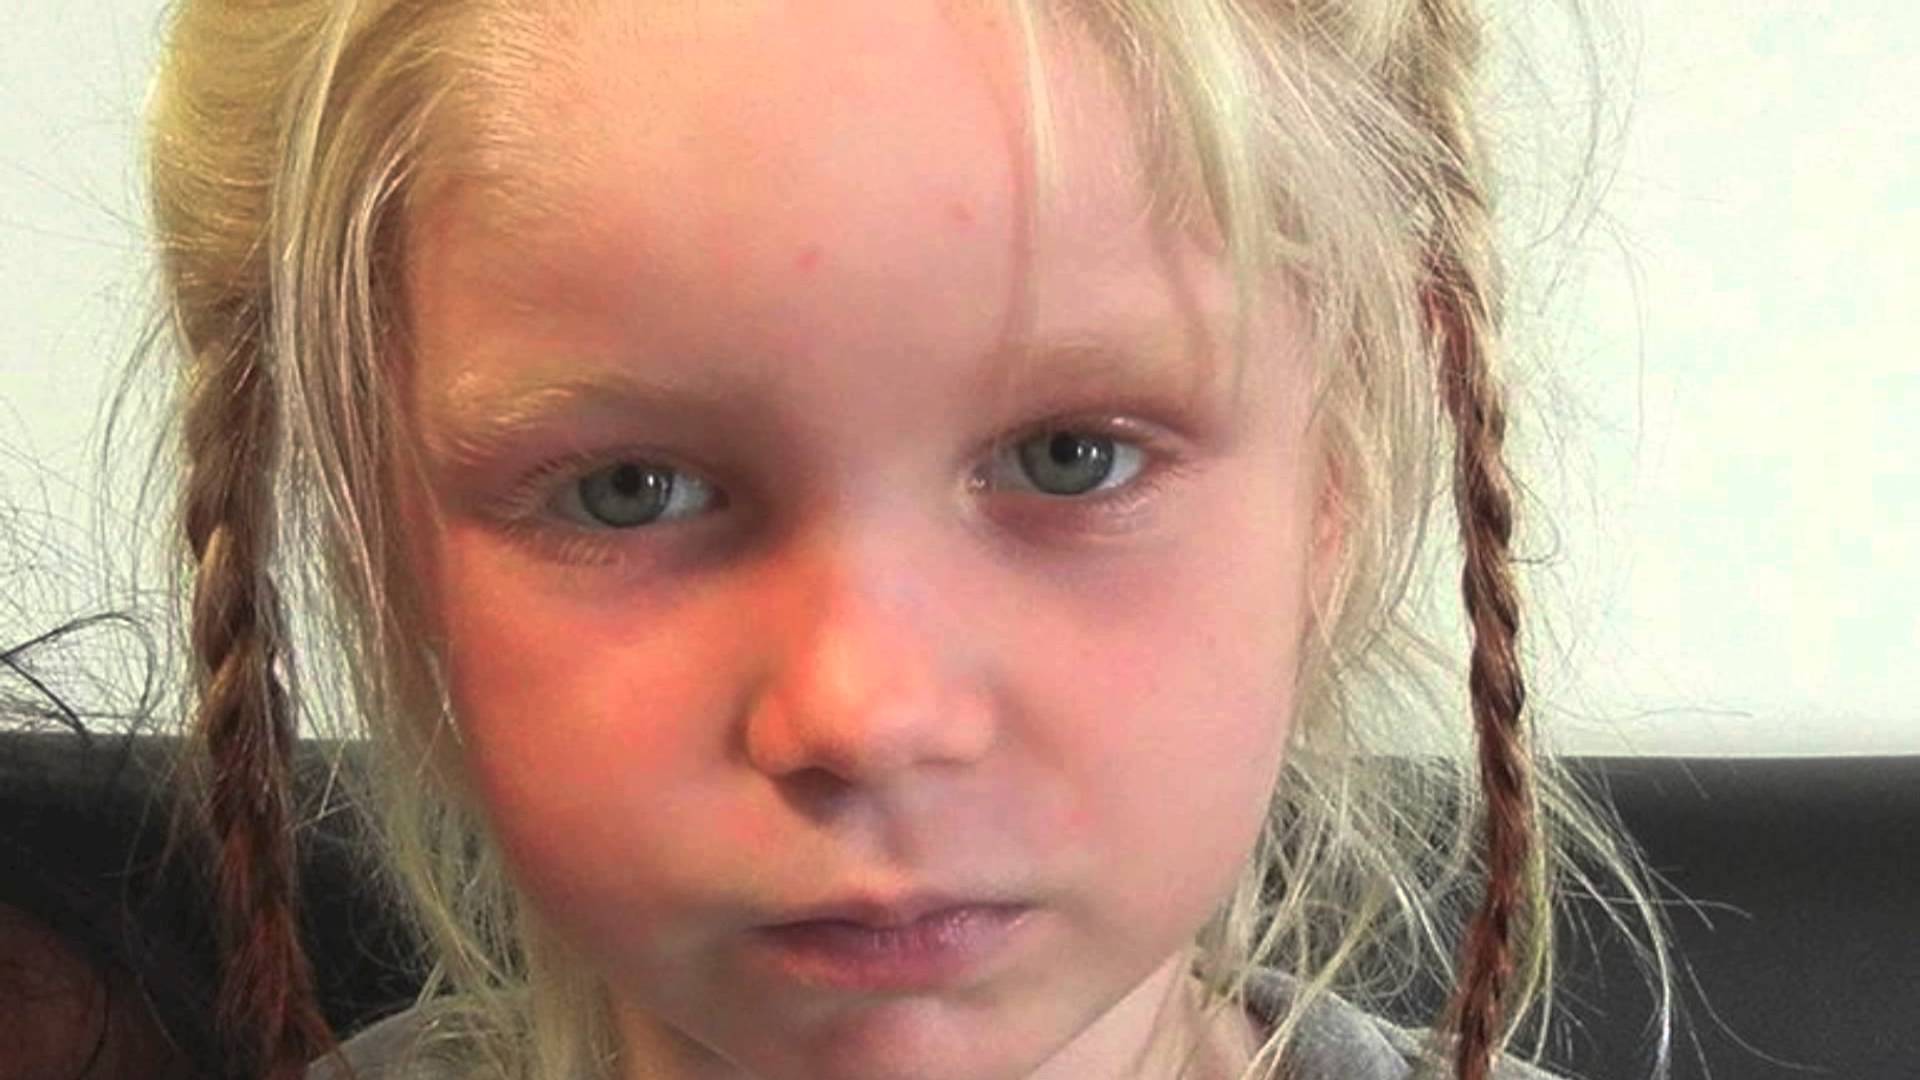 Video of Little Blonde Mystery Girl found in Greece at Roma camp ...